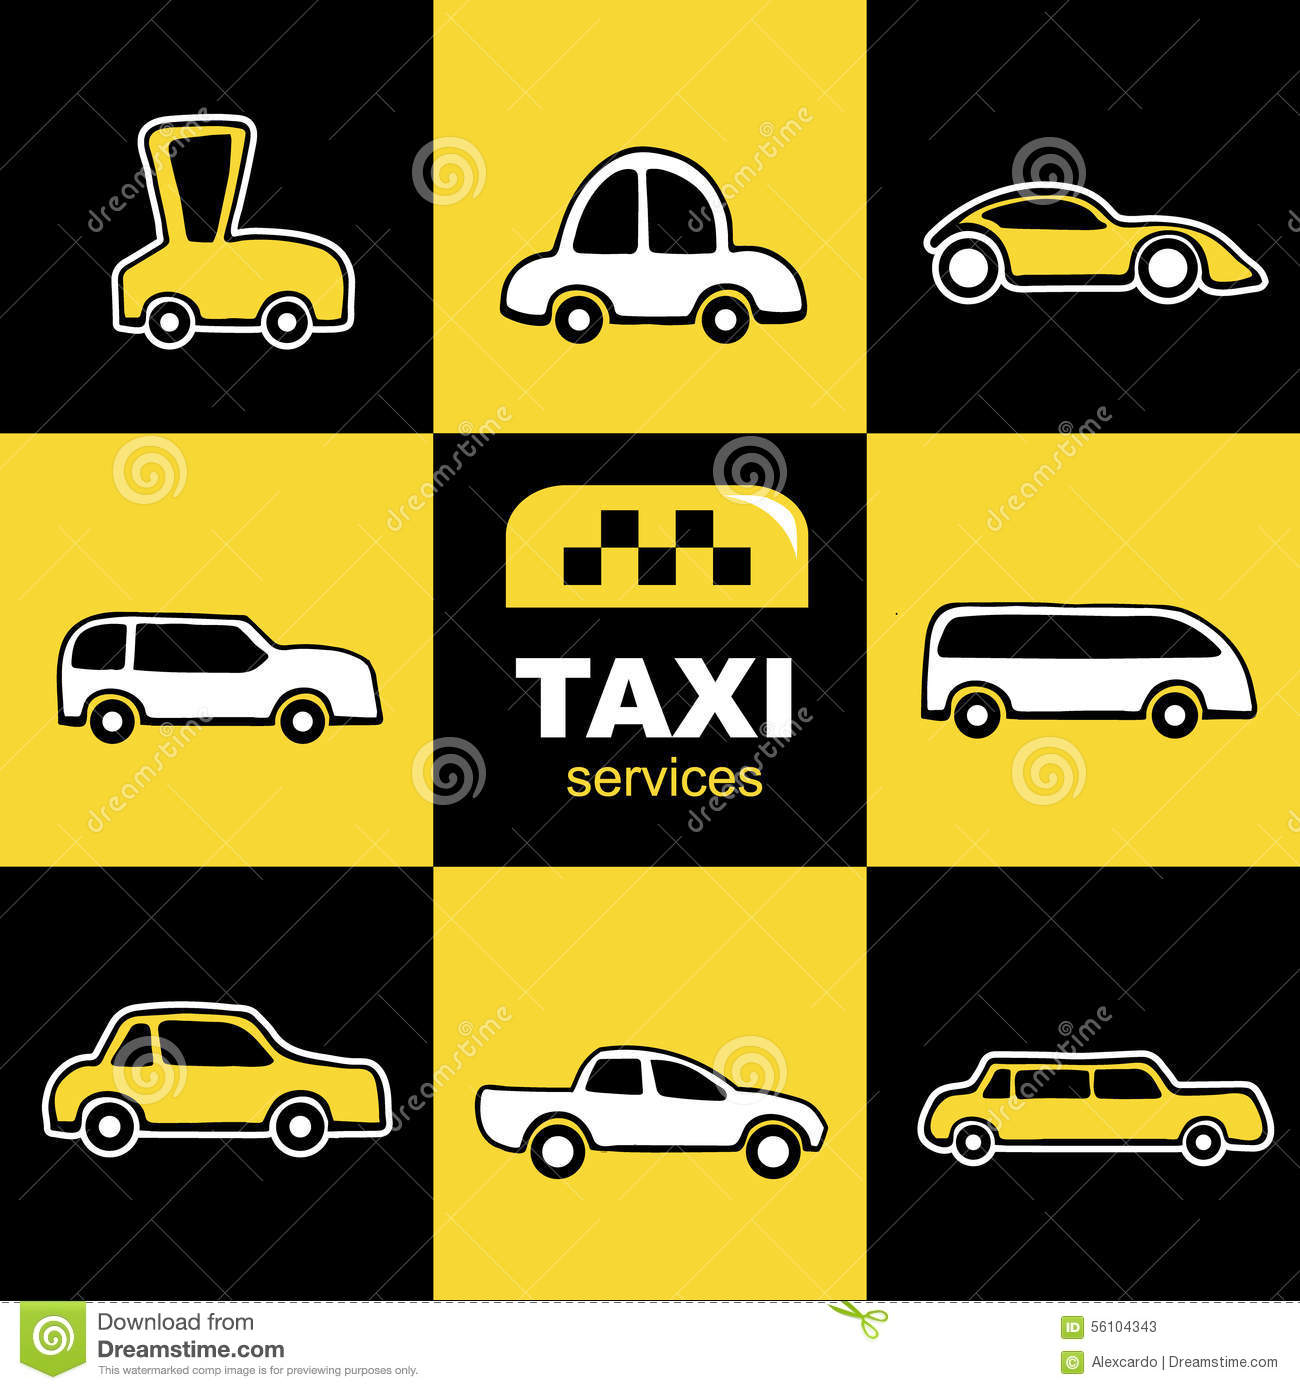 Taxi Service Stock Vector   Image  56104343